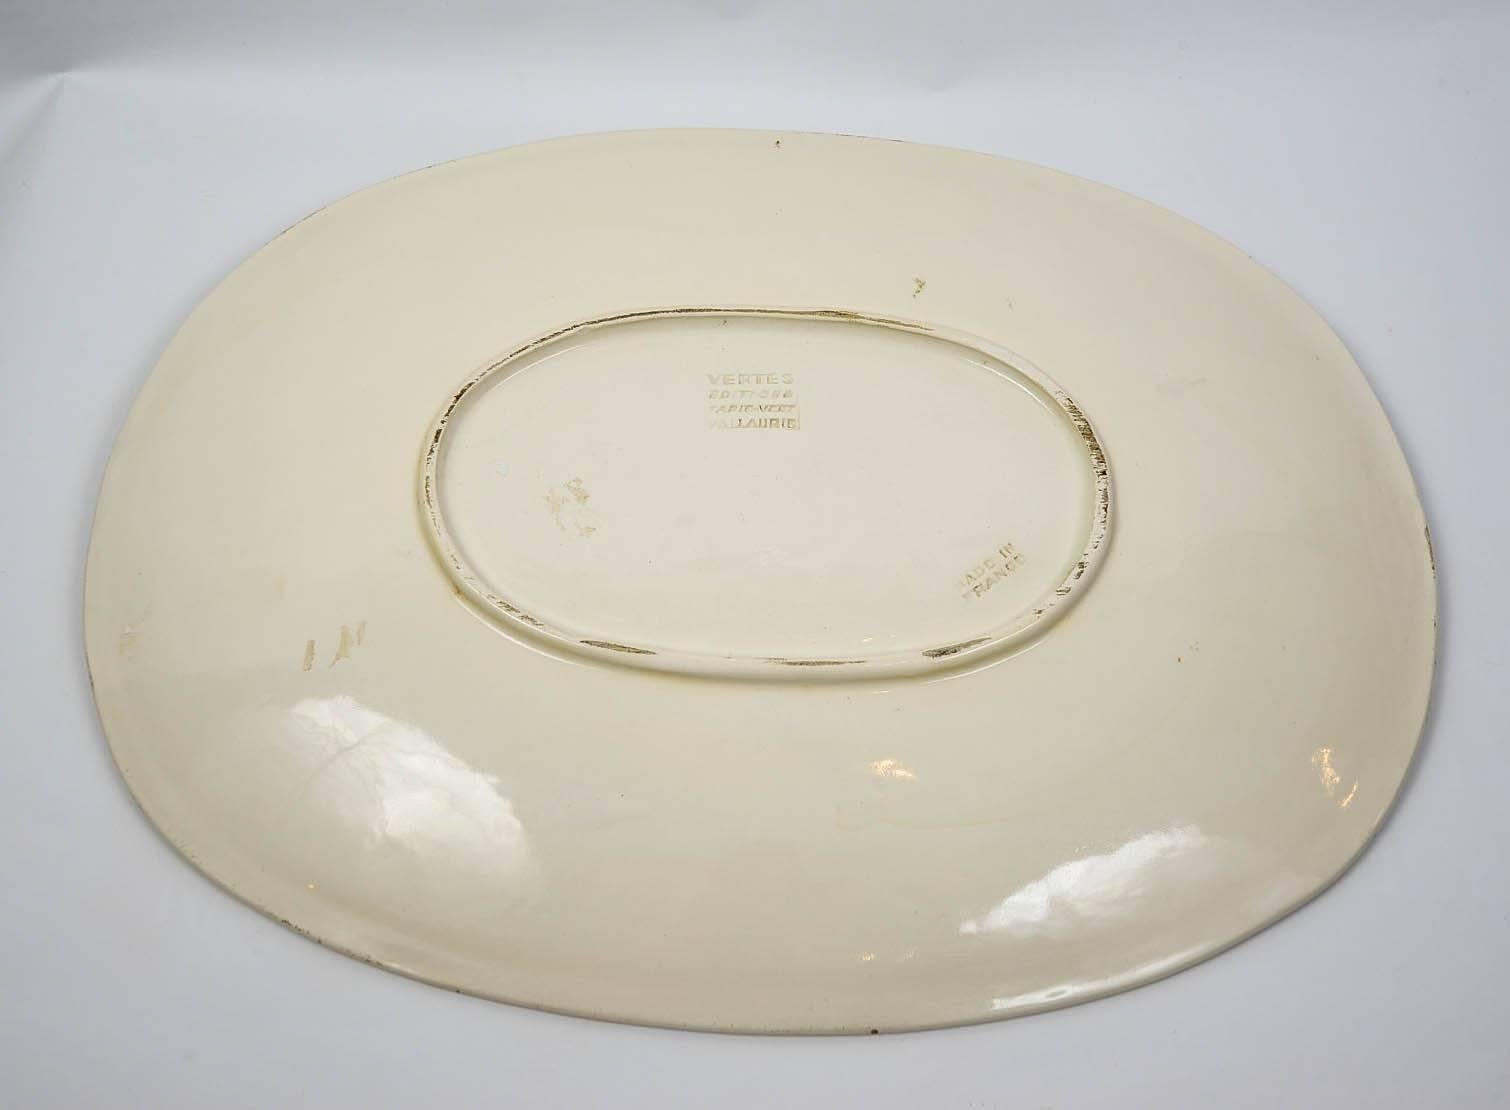 Marcel Vertes Beautiful Plate in Ceramic, Vallauris, circa 1955 In Excellent Condition For Sale In Saint-Ouen, FR